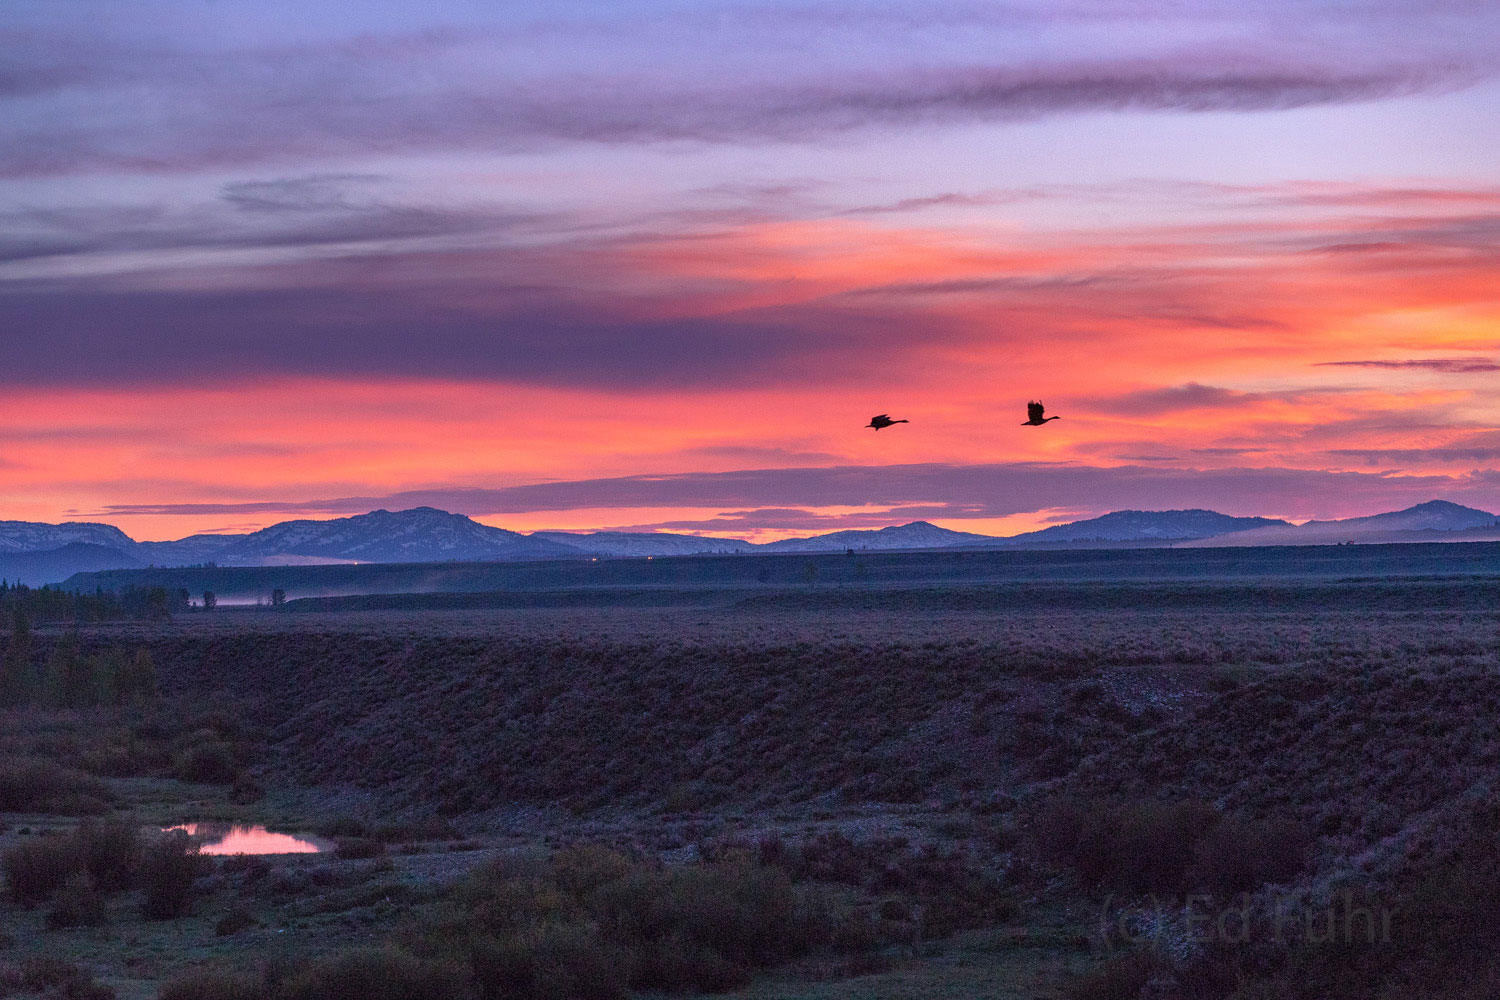 Tundra Swans fly across the morning sky as dawn brings a new day to Grand Teton National Park.